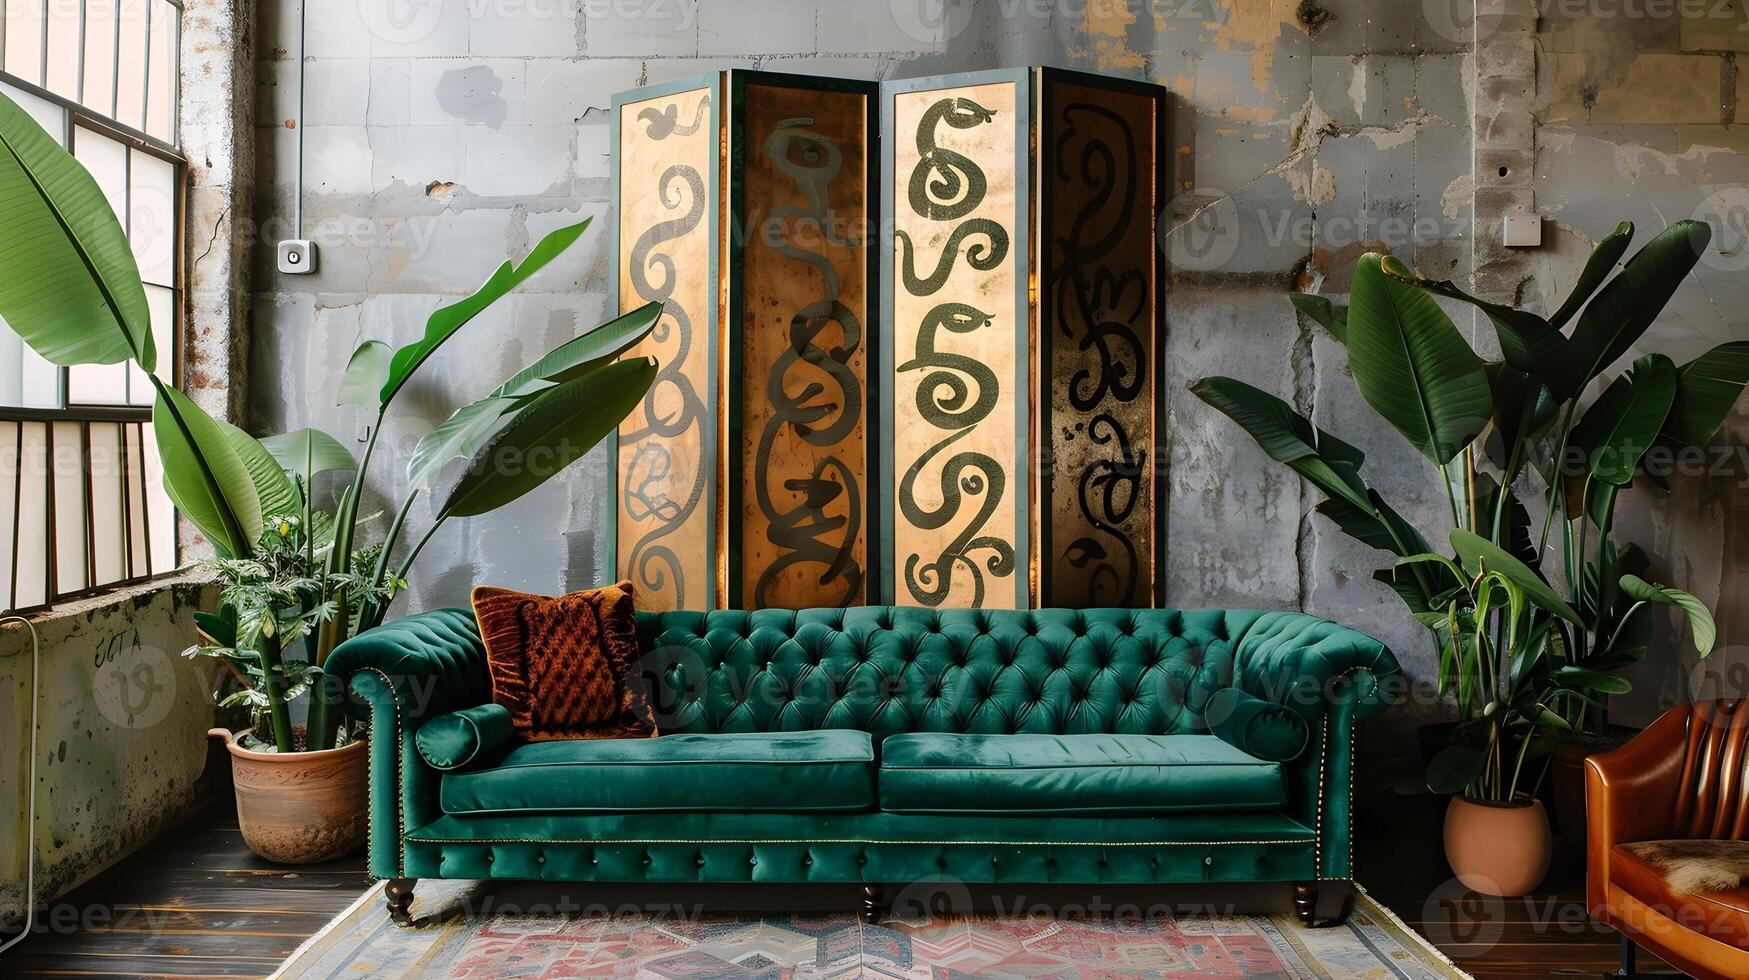 Vintage Emerald Green Chesterfield Sofa Adorns Industrial Loft Space with Boho Decor and Tribal Patterns photo